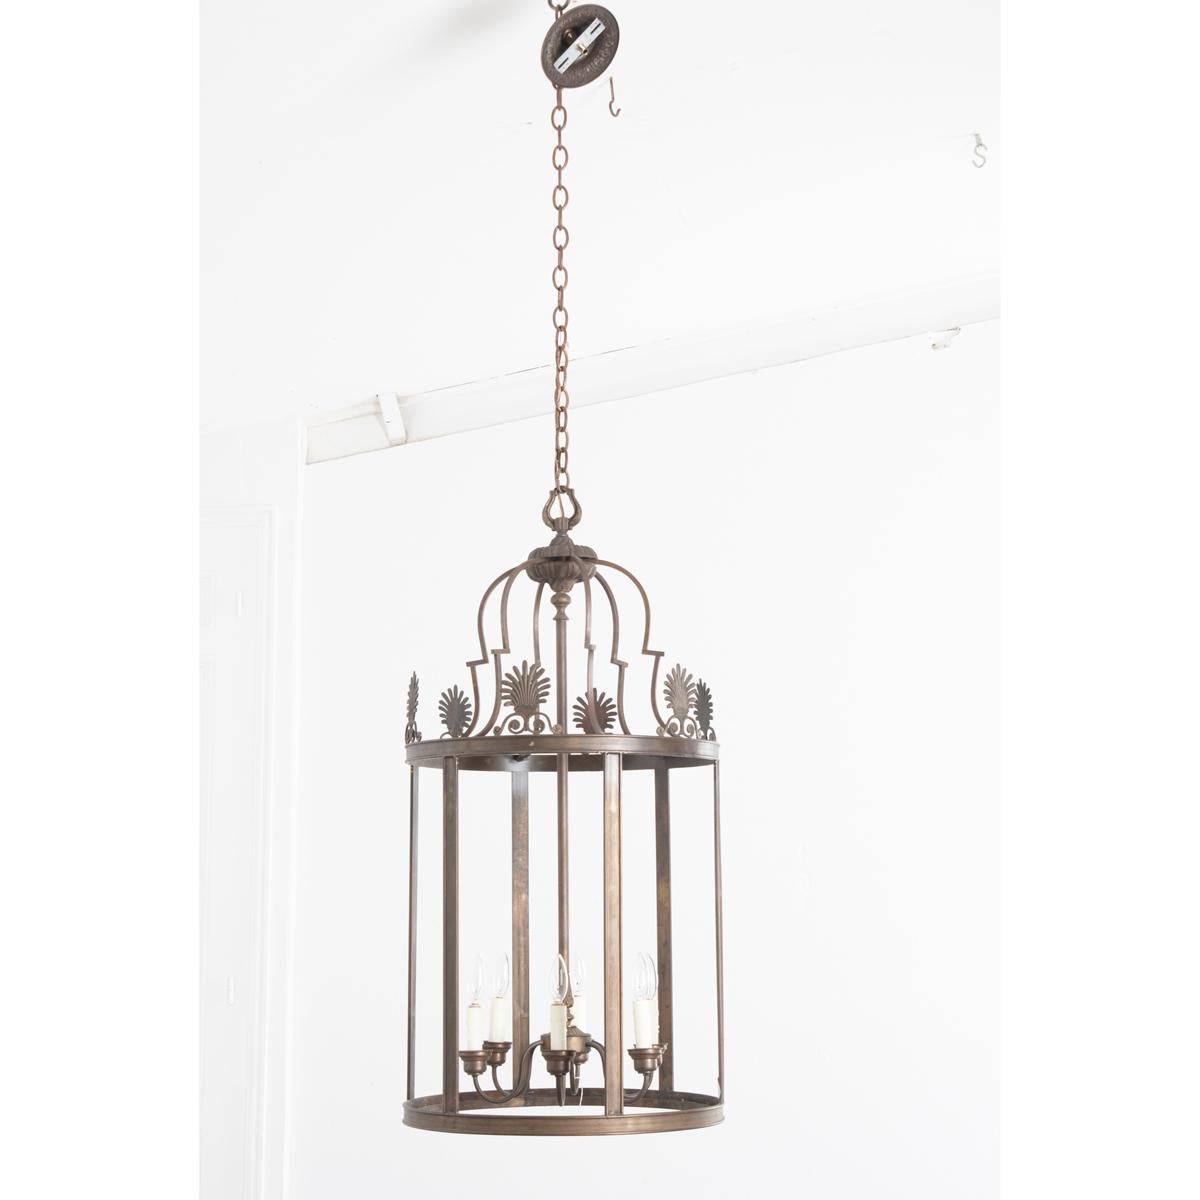 This brass lantern is huge and ready to be installed where a large single fixture is needed. The fixture has two sets of lovely curved brass arches that attach to the nicly decorative crown. Six beautiful floral and scroll ornaments line the